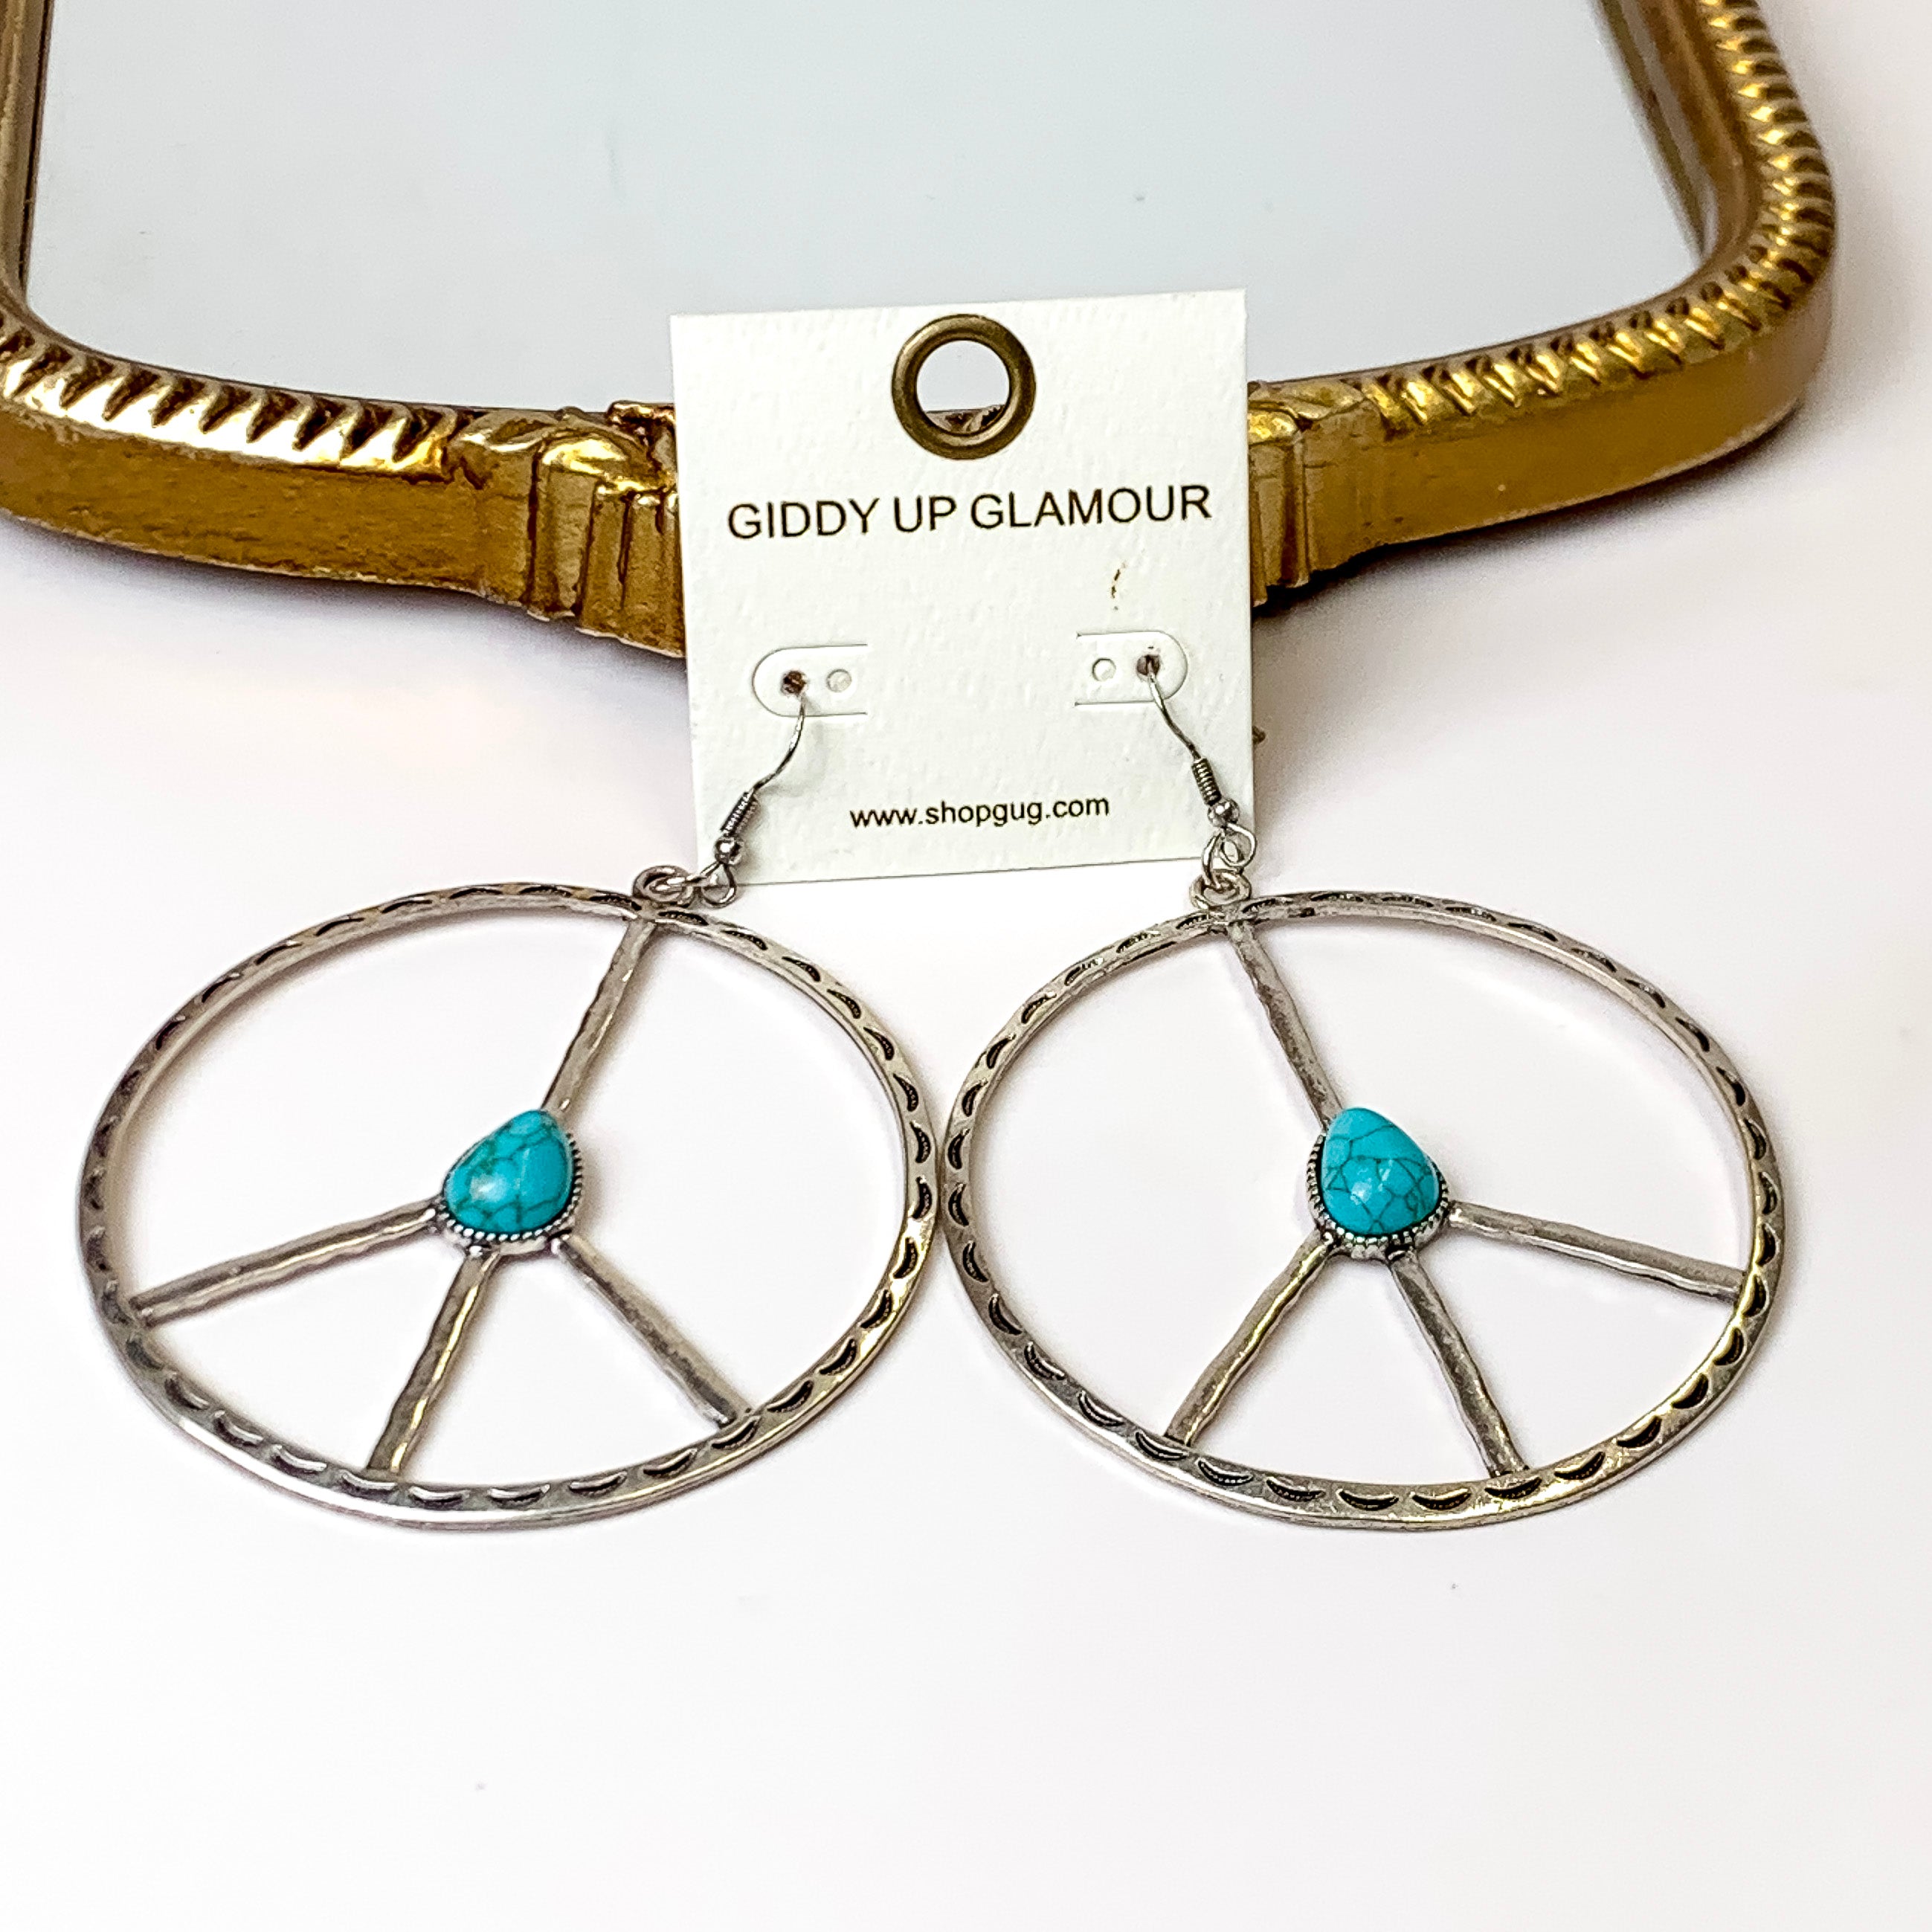 Silver Tone Etched Peace Sign Drop Earrings with Faux Turquoise Stone Accent - Giddy Up Glamour Boutique